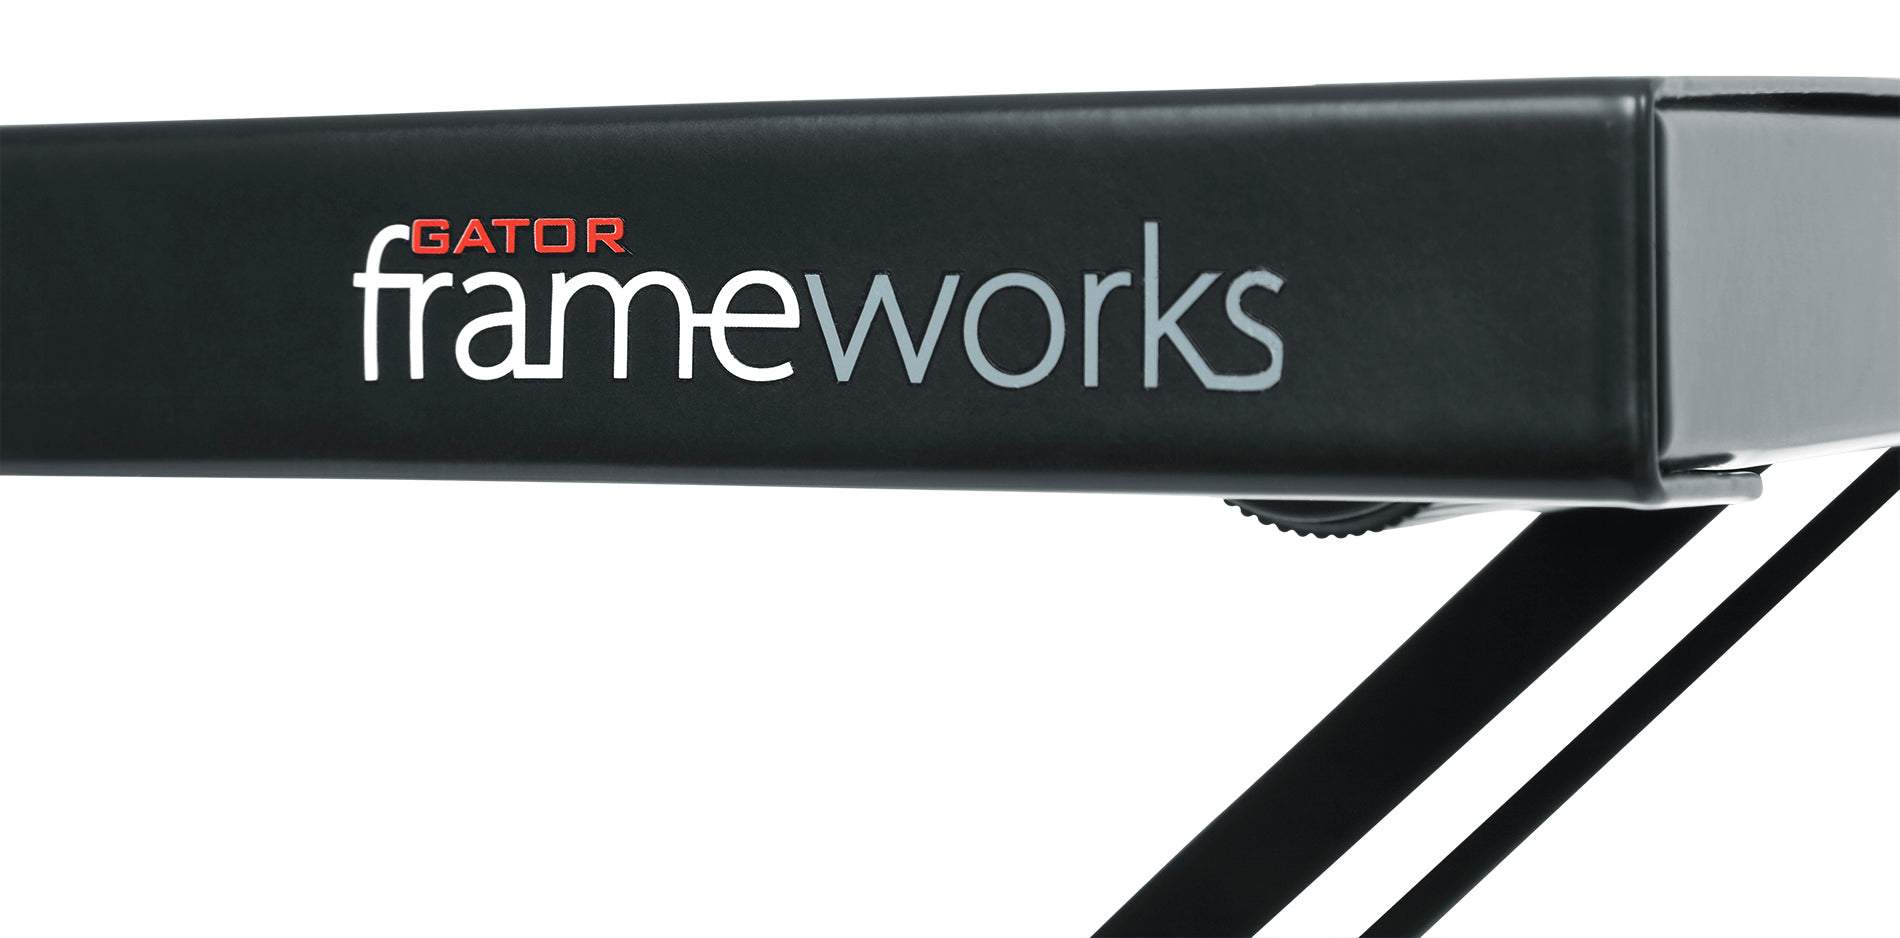 Gator Frameworks | Utility Table Top & “X” Style Stand